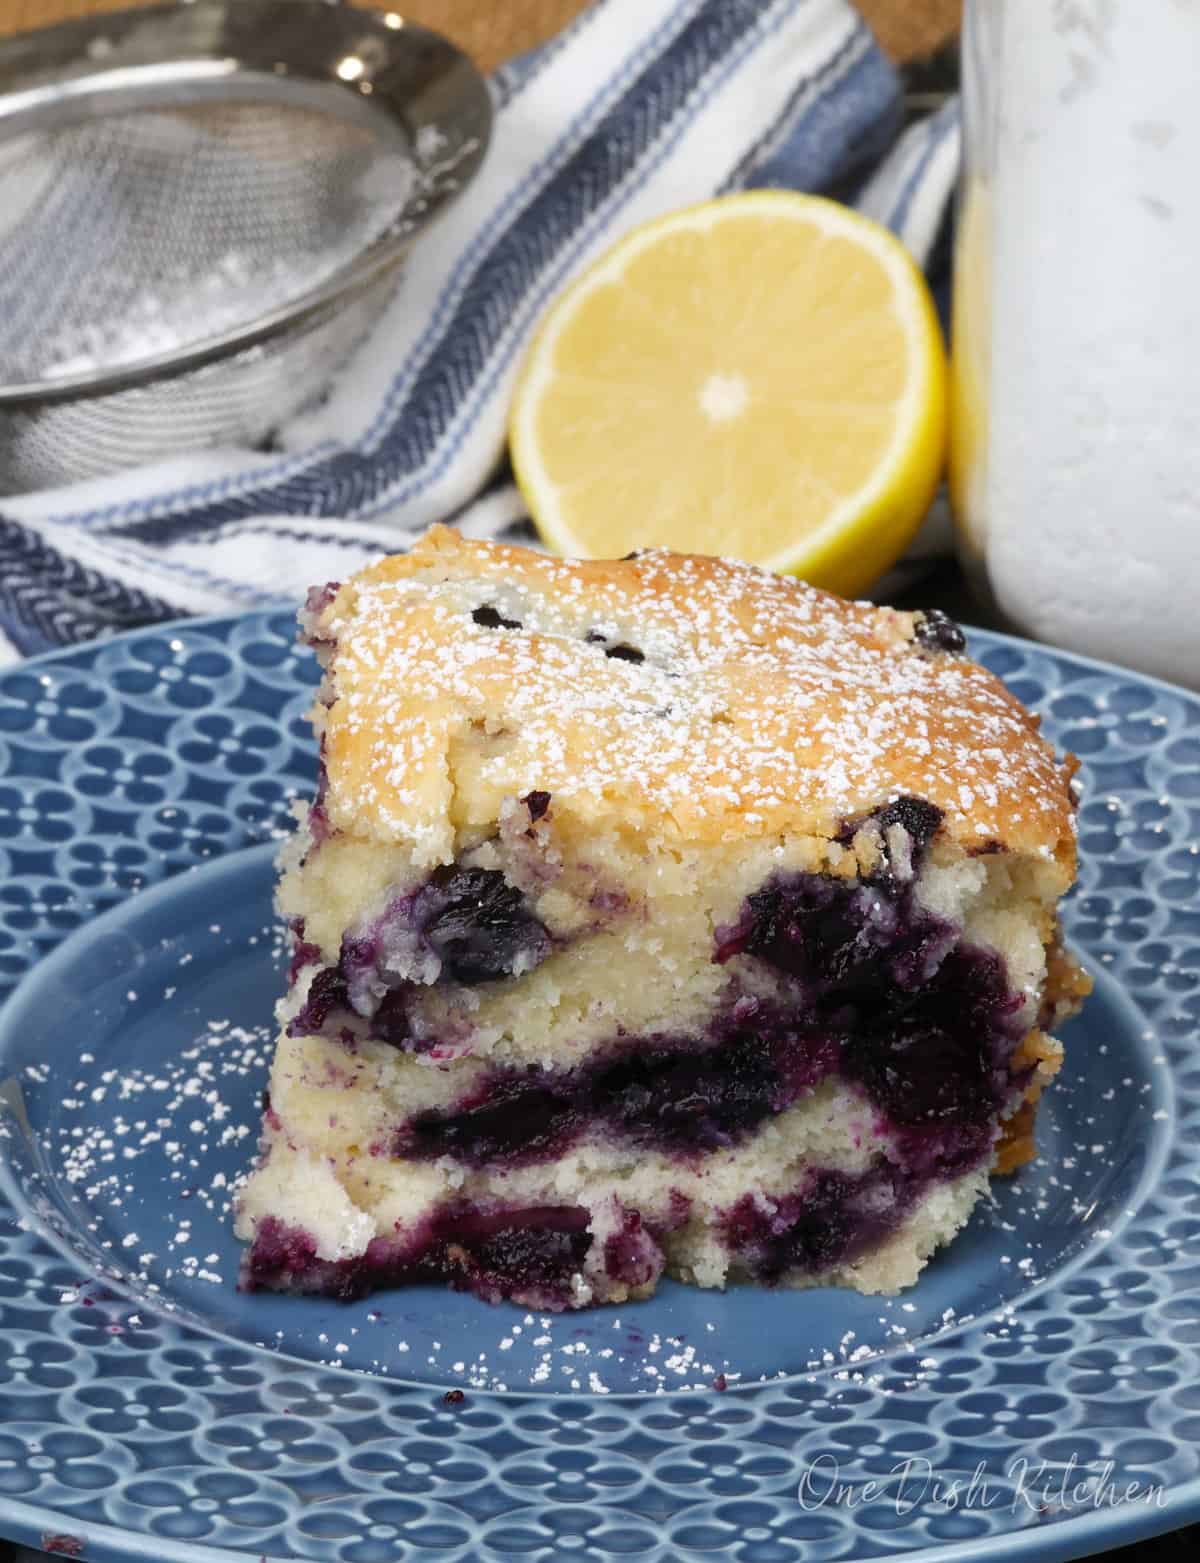 a slice of blueberry cake on a blue plate next to a half of a lemon and a bowl of powdered sugar.